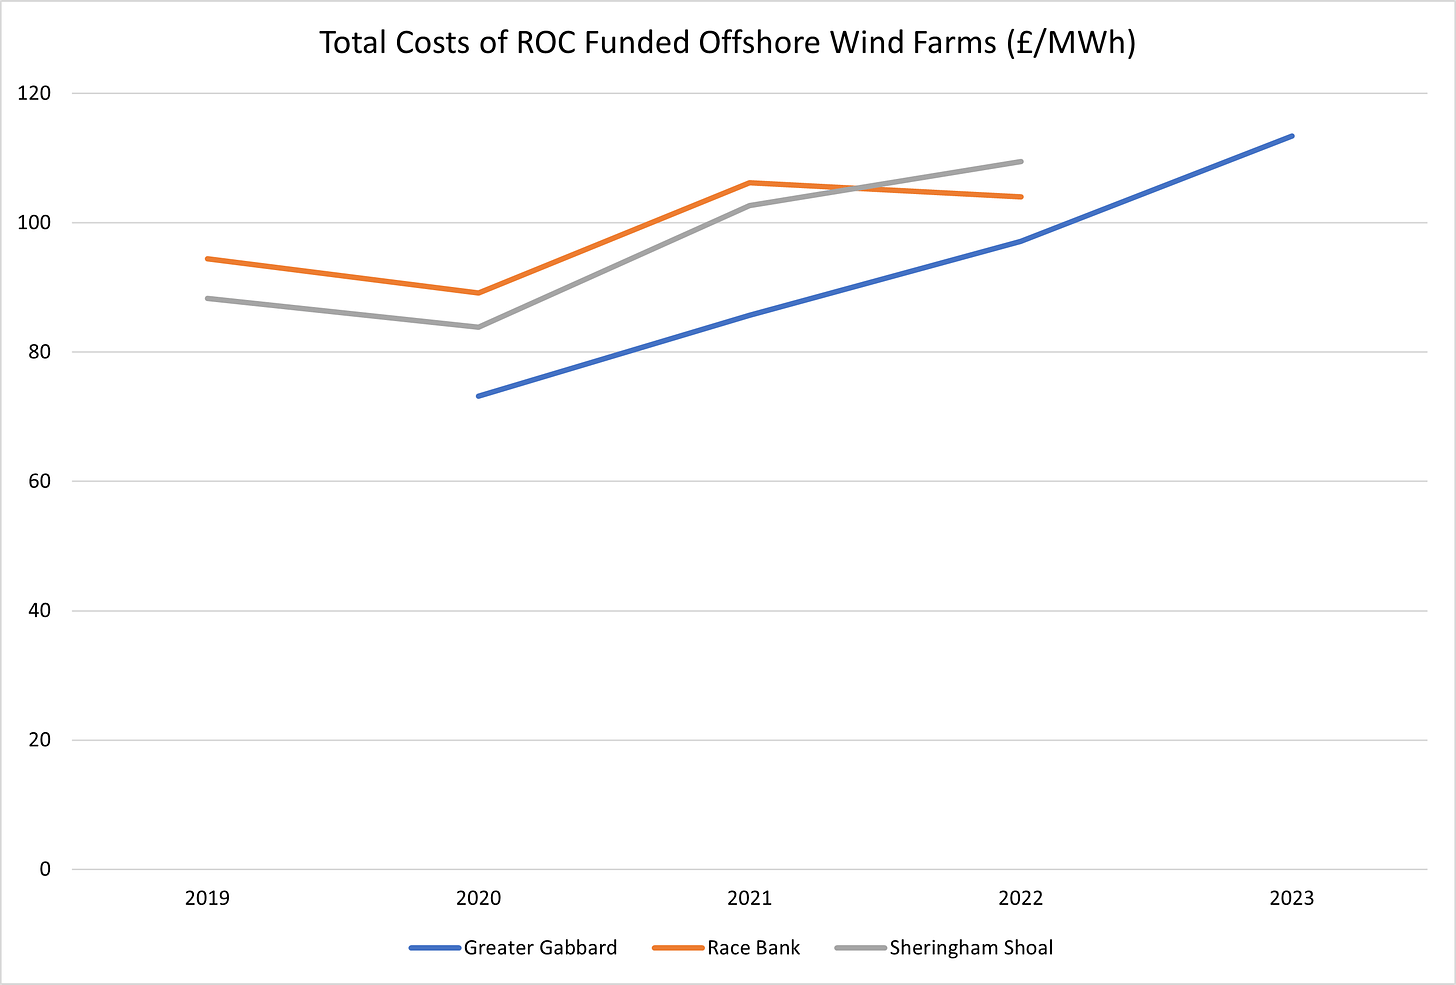 Figure 5 - Total Costs of ROC Funded Offshore Funded Windfarms (£ per MWh)